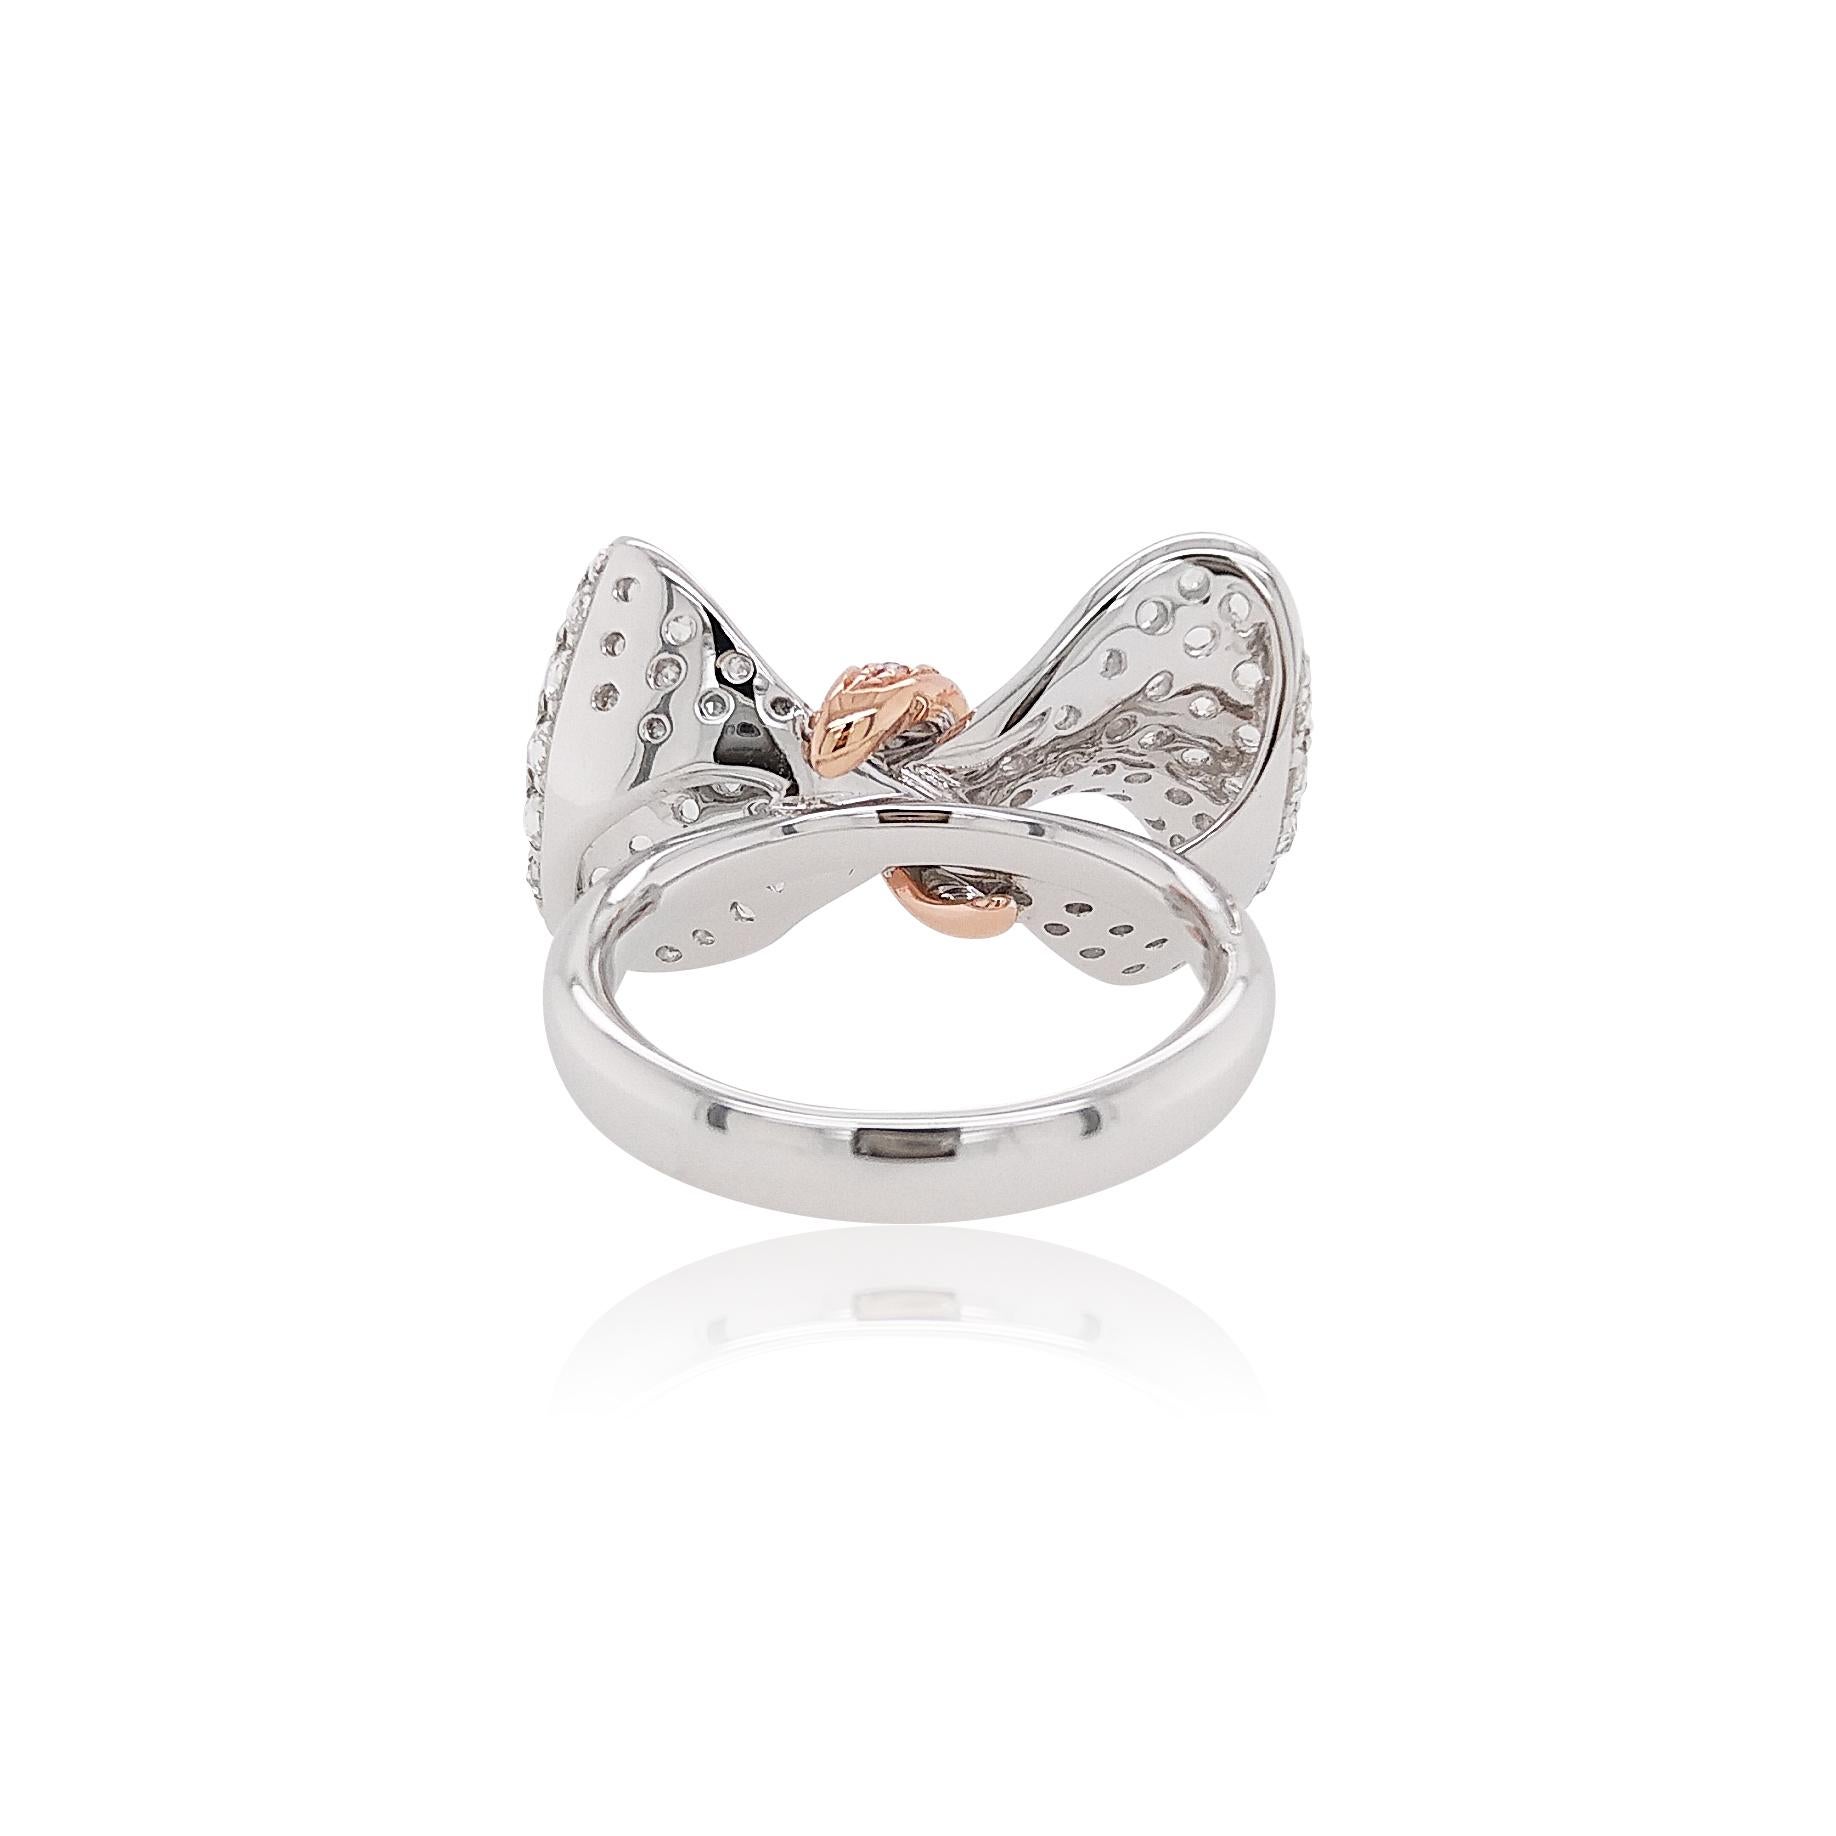 This exquisite ring features lustrous crisp white Rose-cut White Diamonds alongside spectacular natural Pink Diamonds making an adorable bow. Bows and knots are not only beautiful, they impart their own meanings of eternity, remembering and